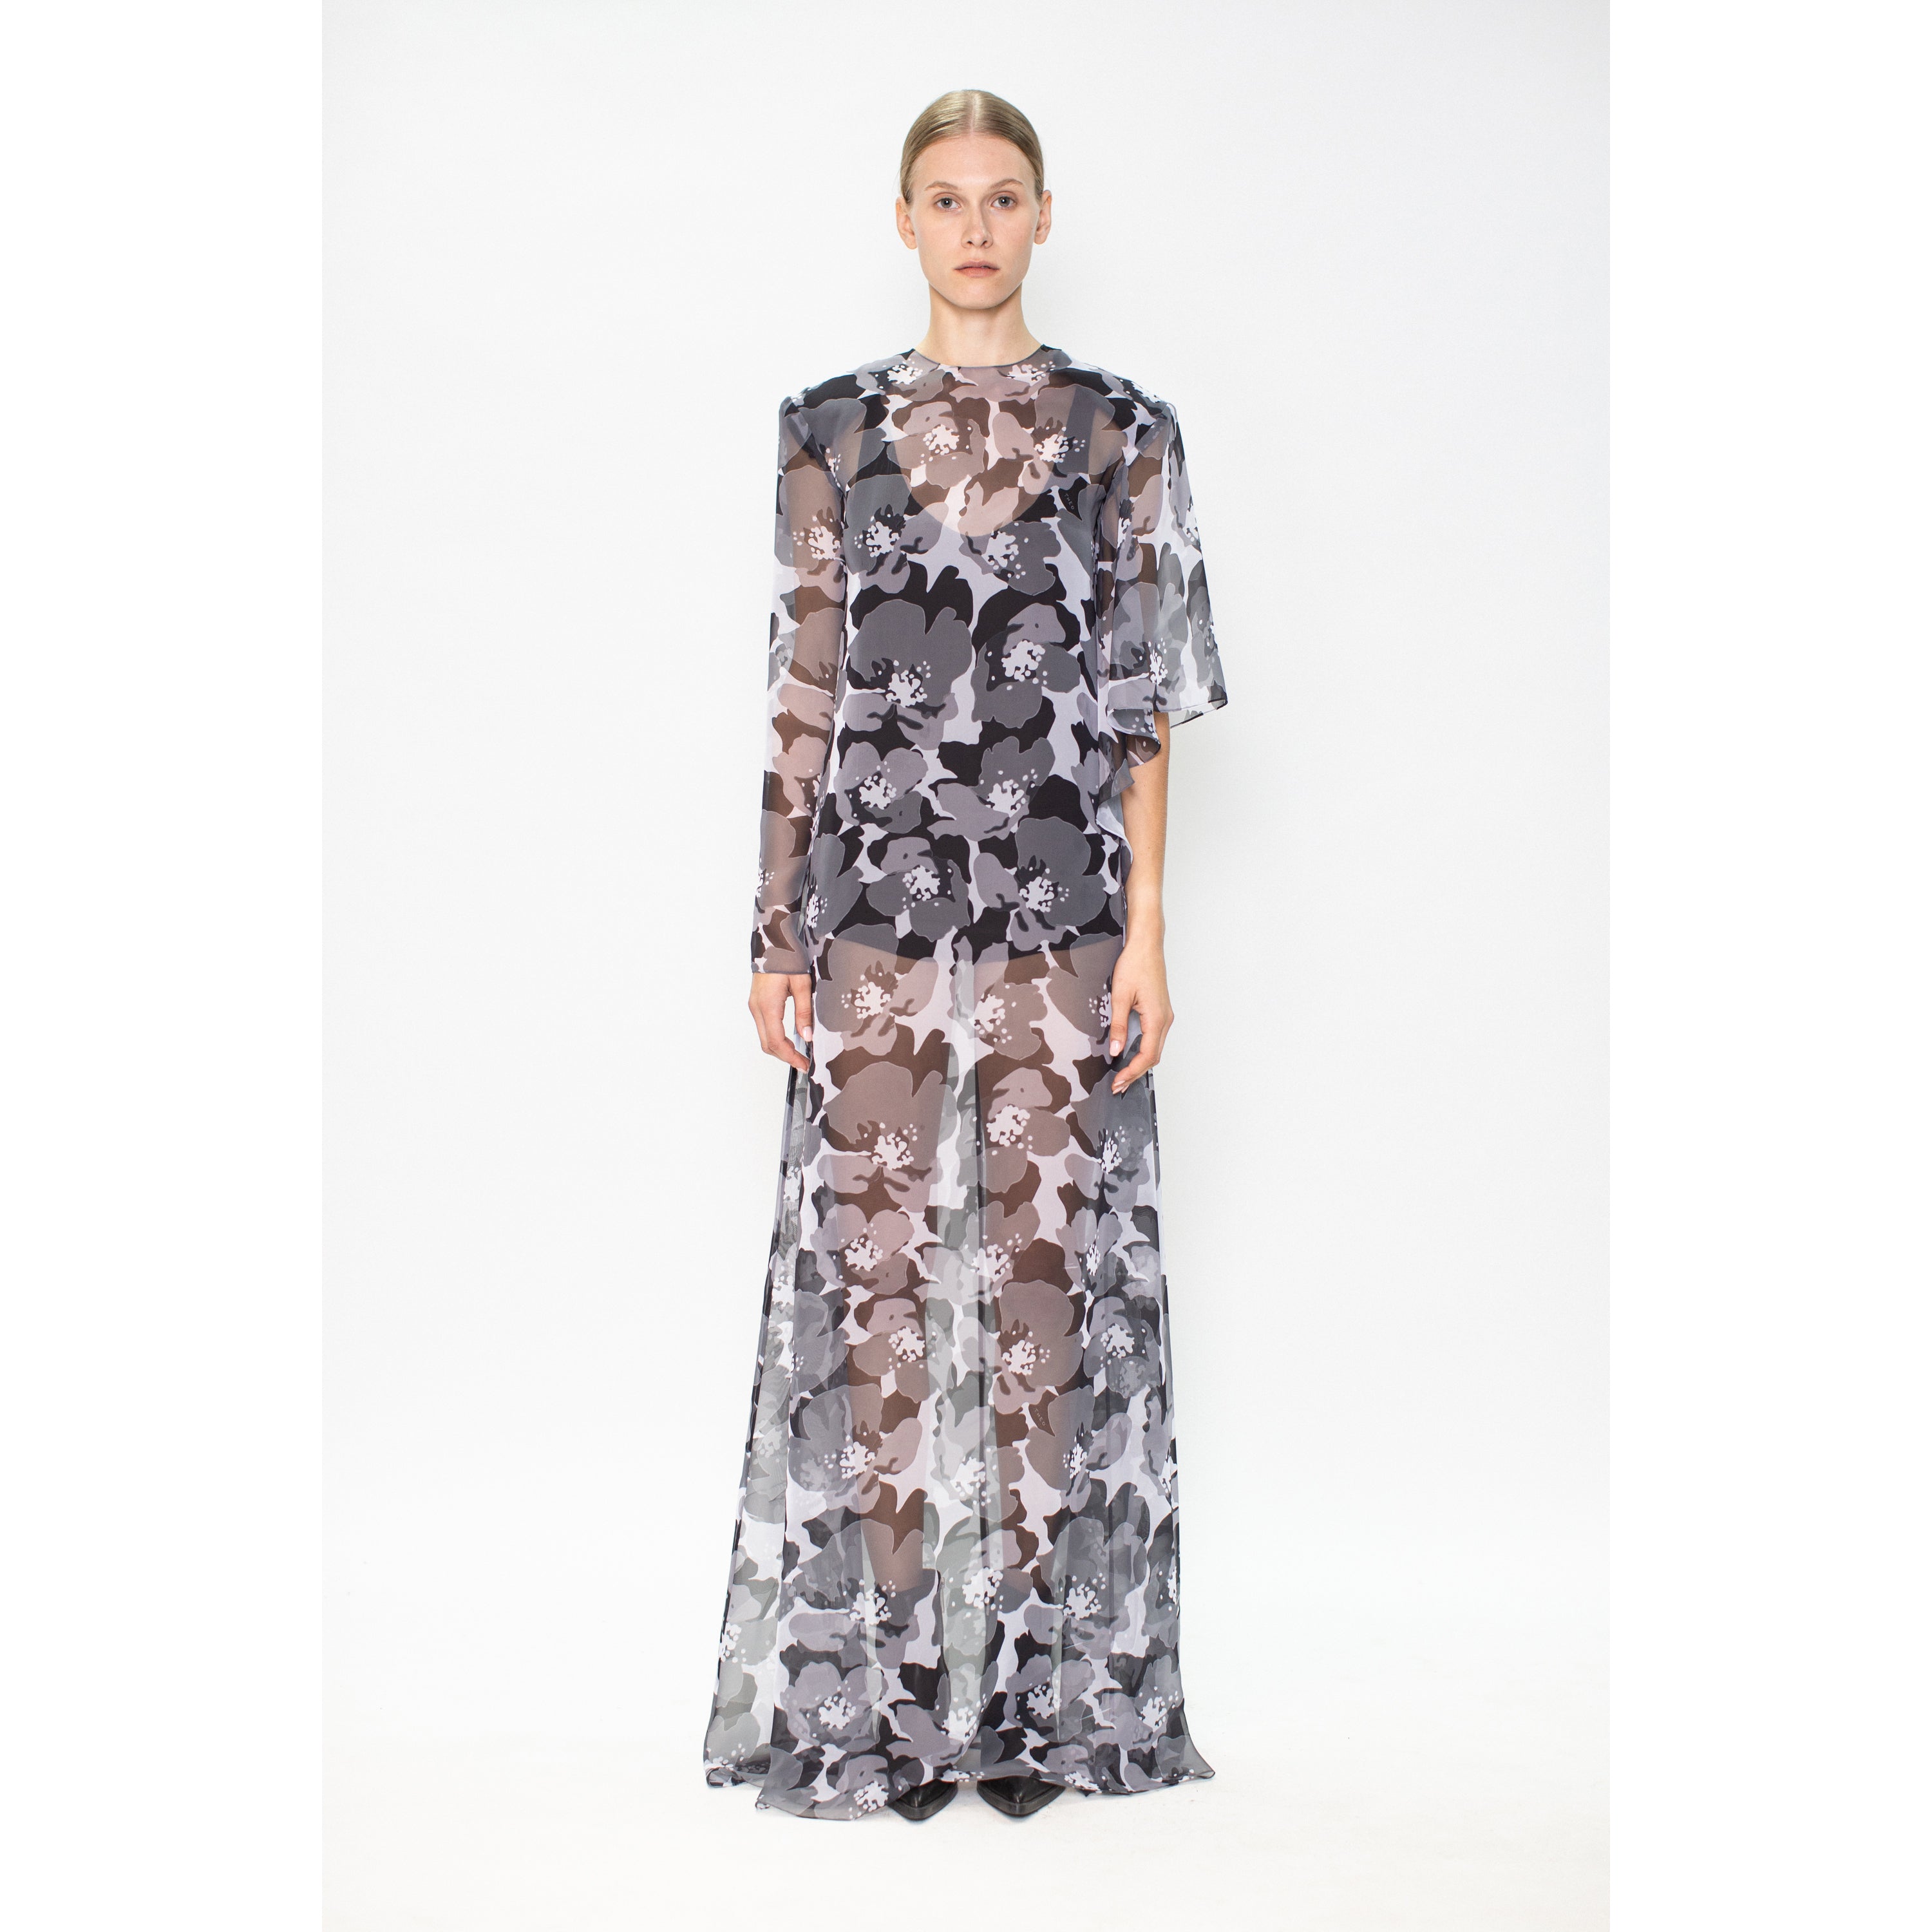 MAXI DRESS WITH ACHROMATIC FLORAL PRINT